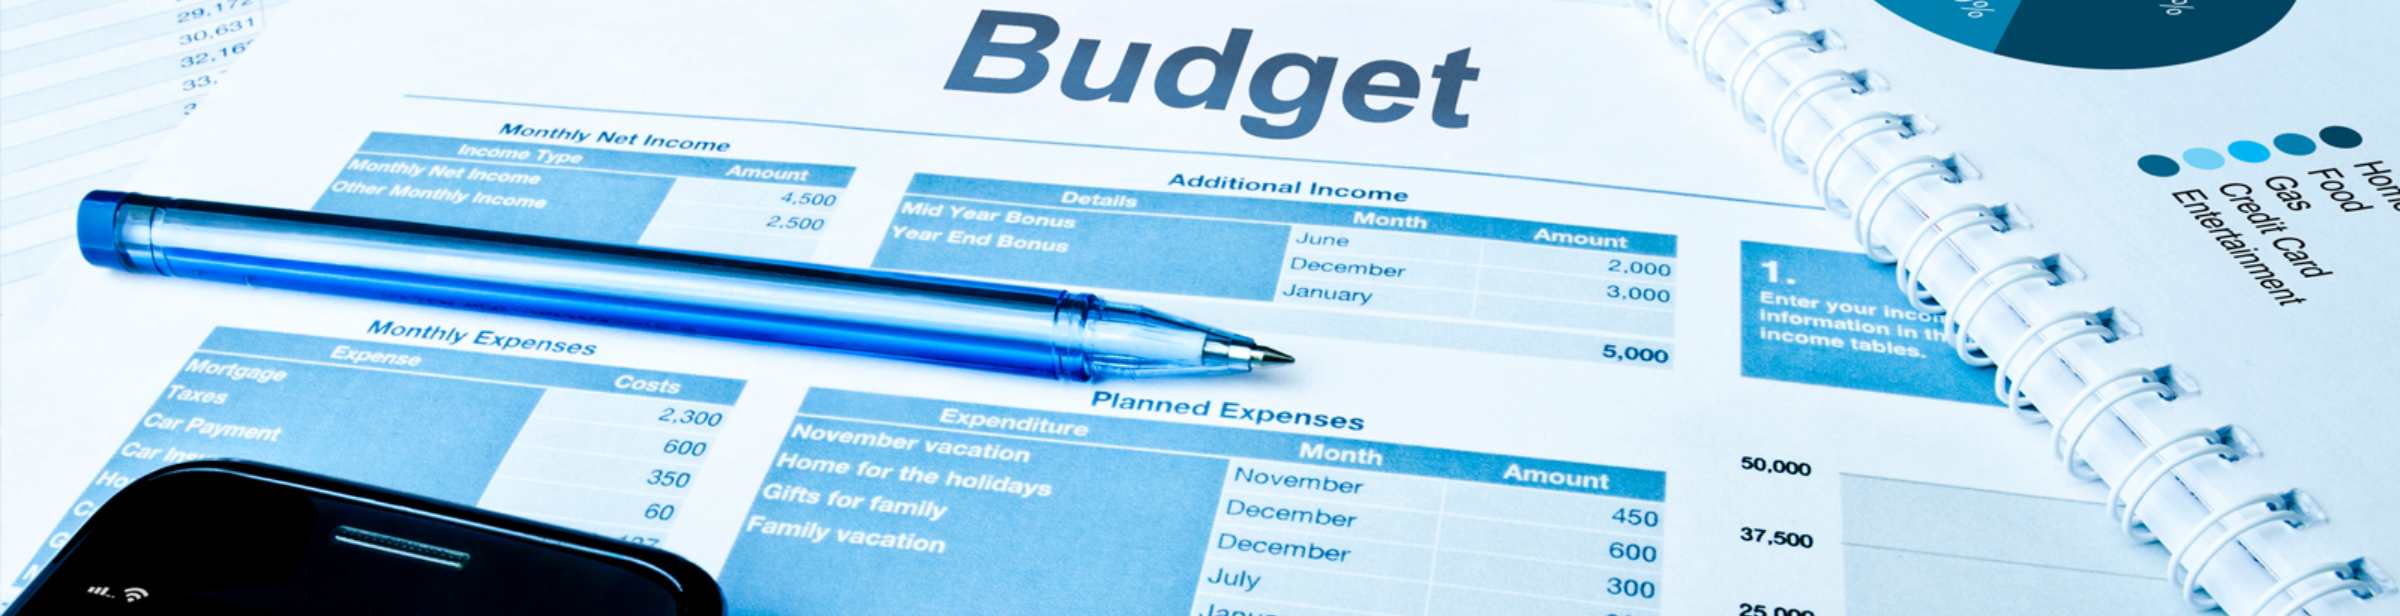 budget and financial documents